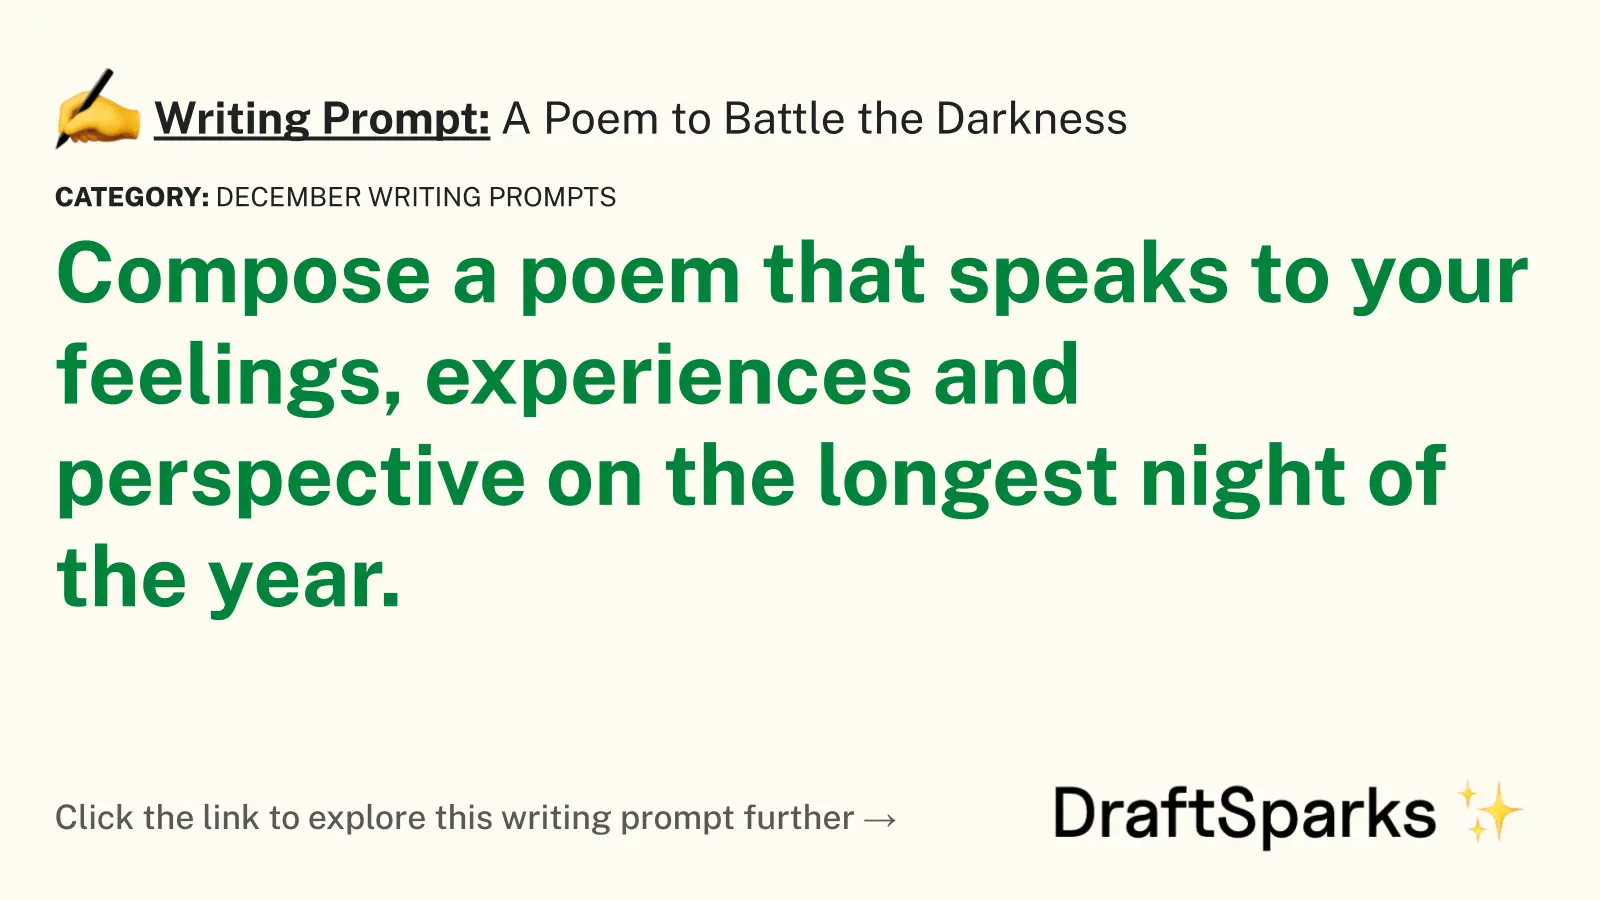 A Poem to Battle the Darkness